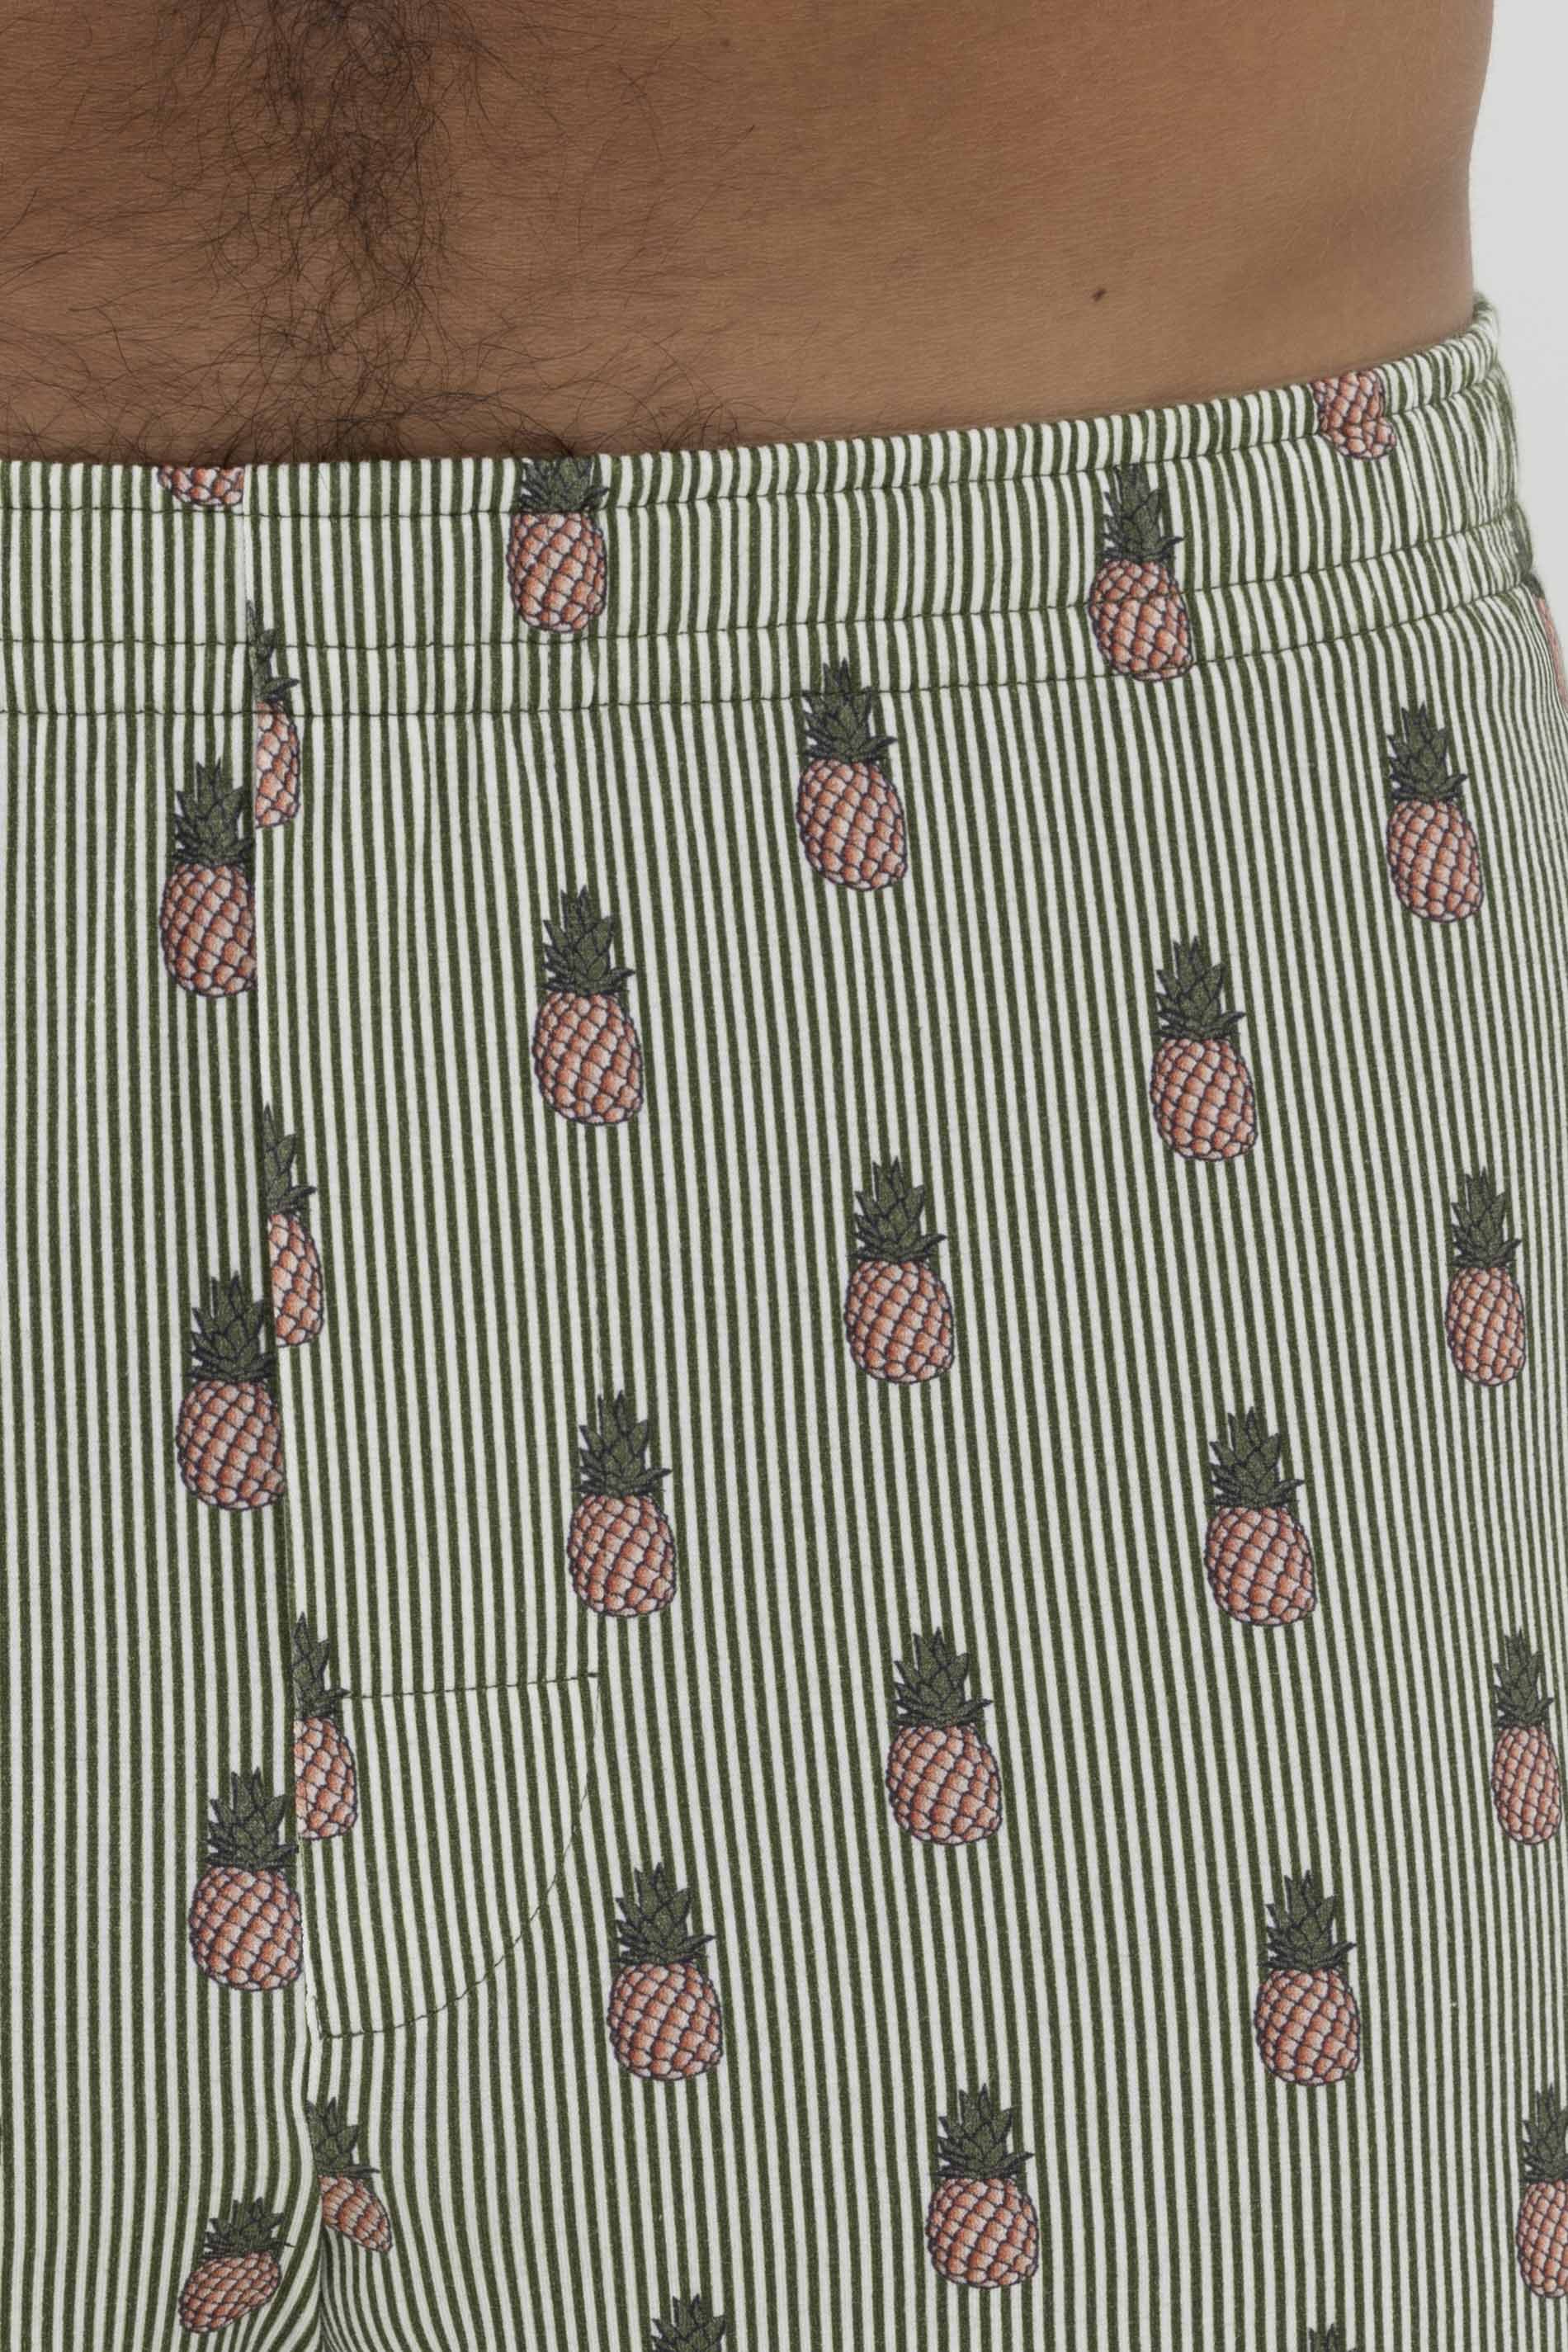 Shorts Serie Pineapple Detail View 01 | mey®